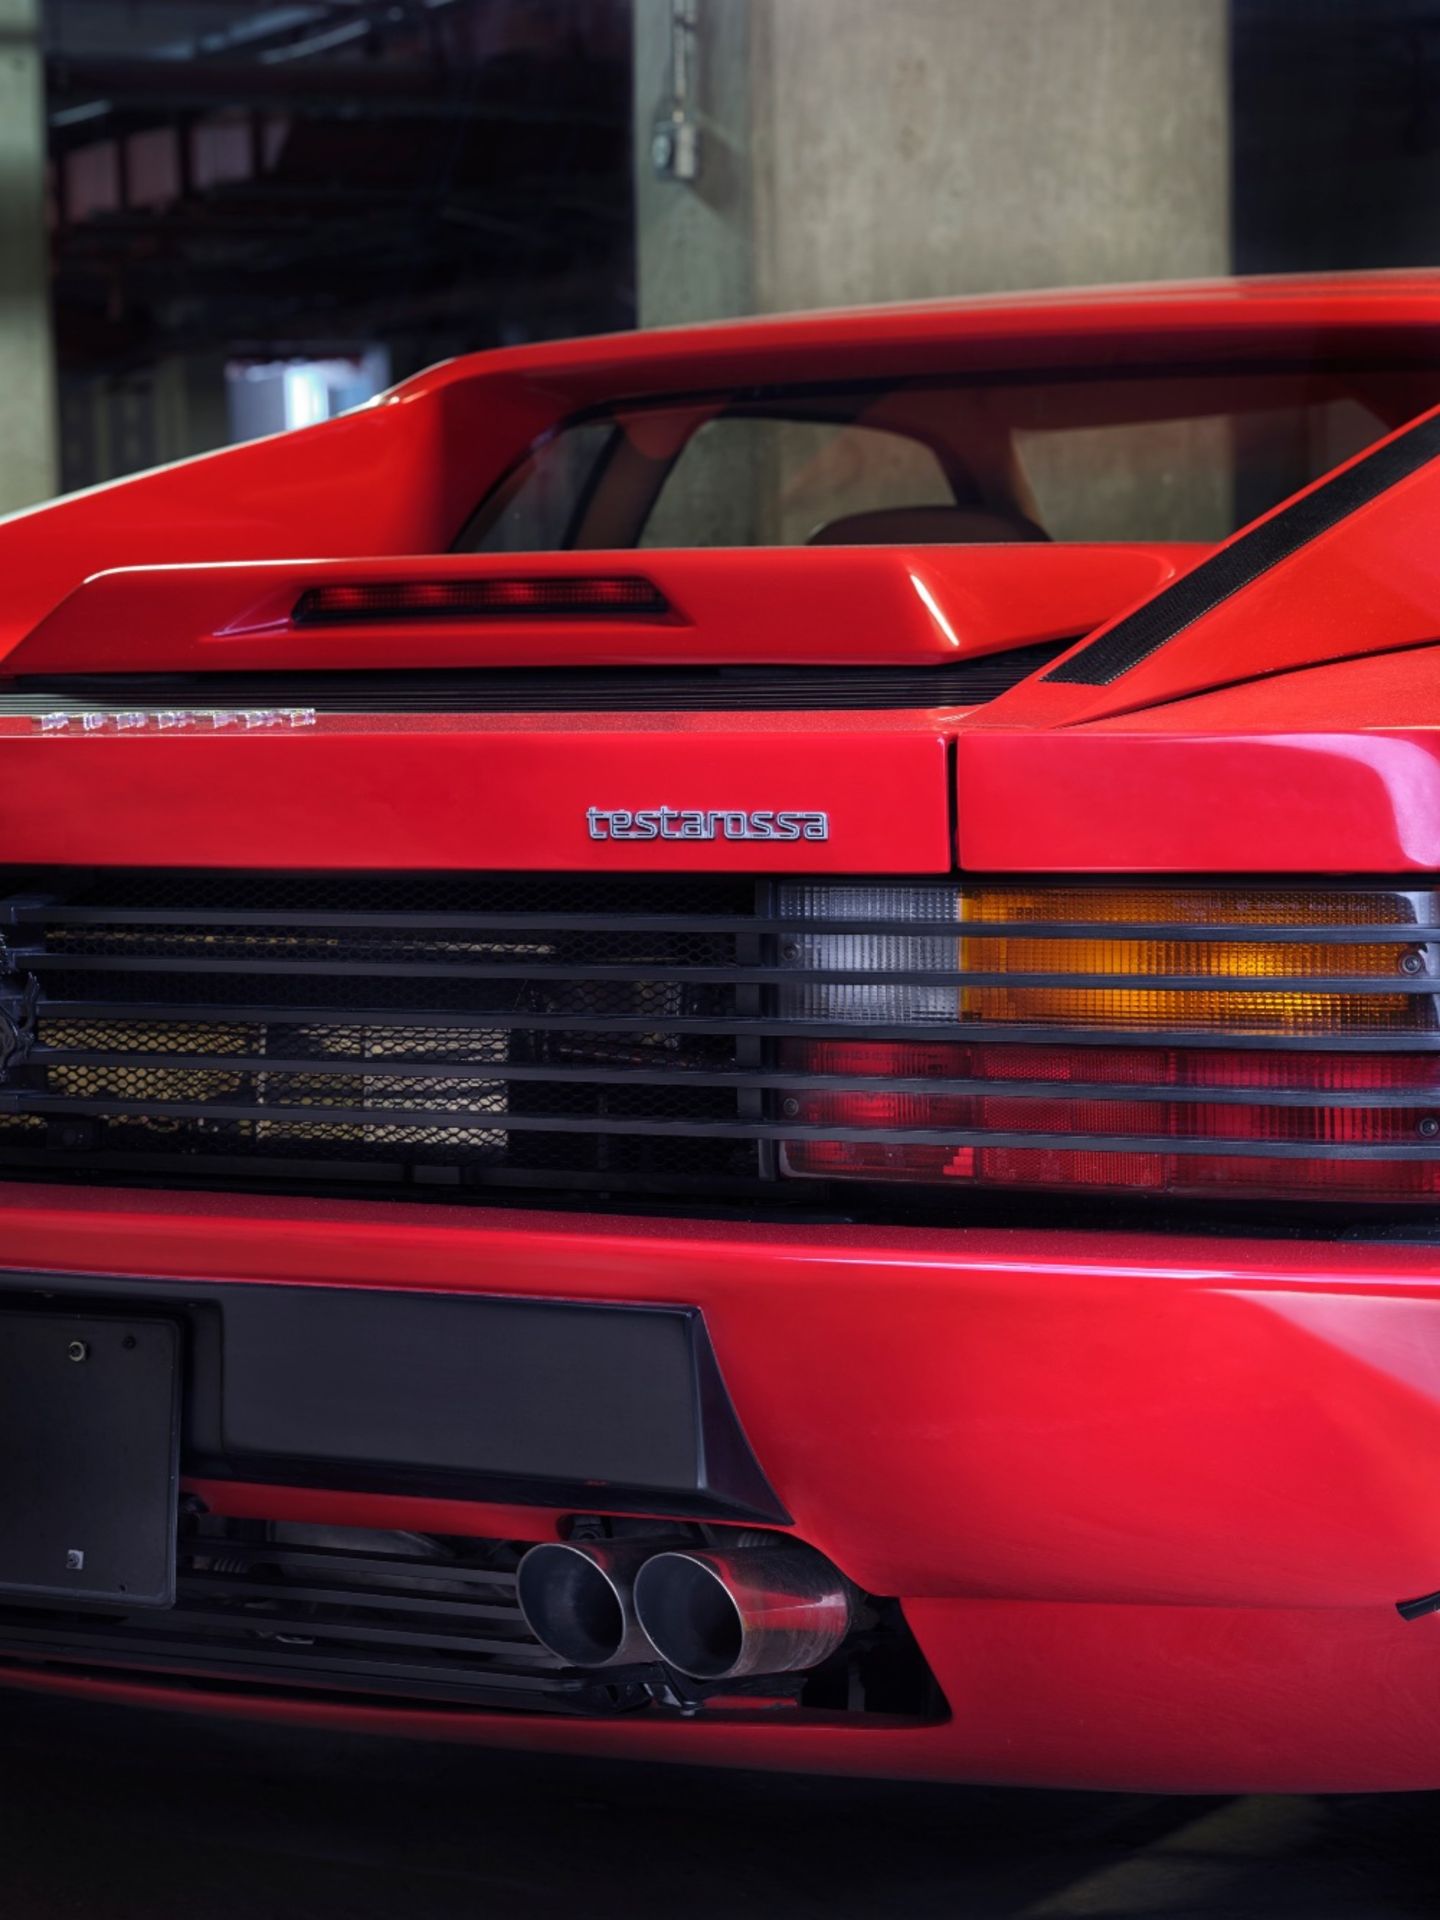 1991 FERRARI TESTAROSSA Registration Number: UK Taxes Paid     Chassis Number: ZFFSM17A6M0088562 - Image 9 of 24